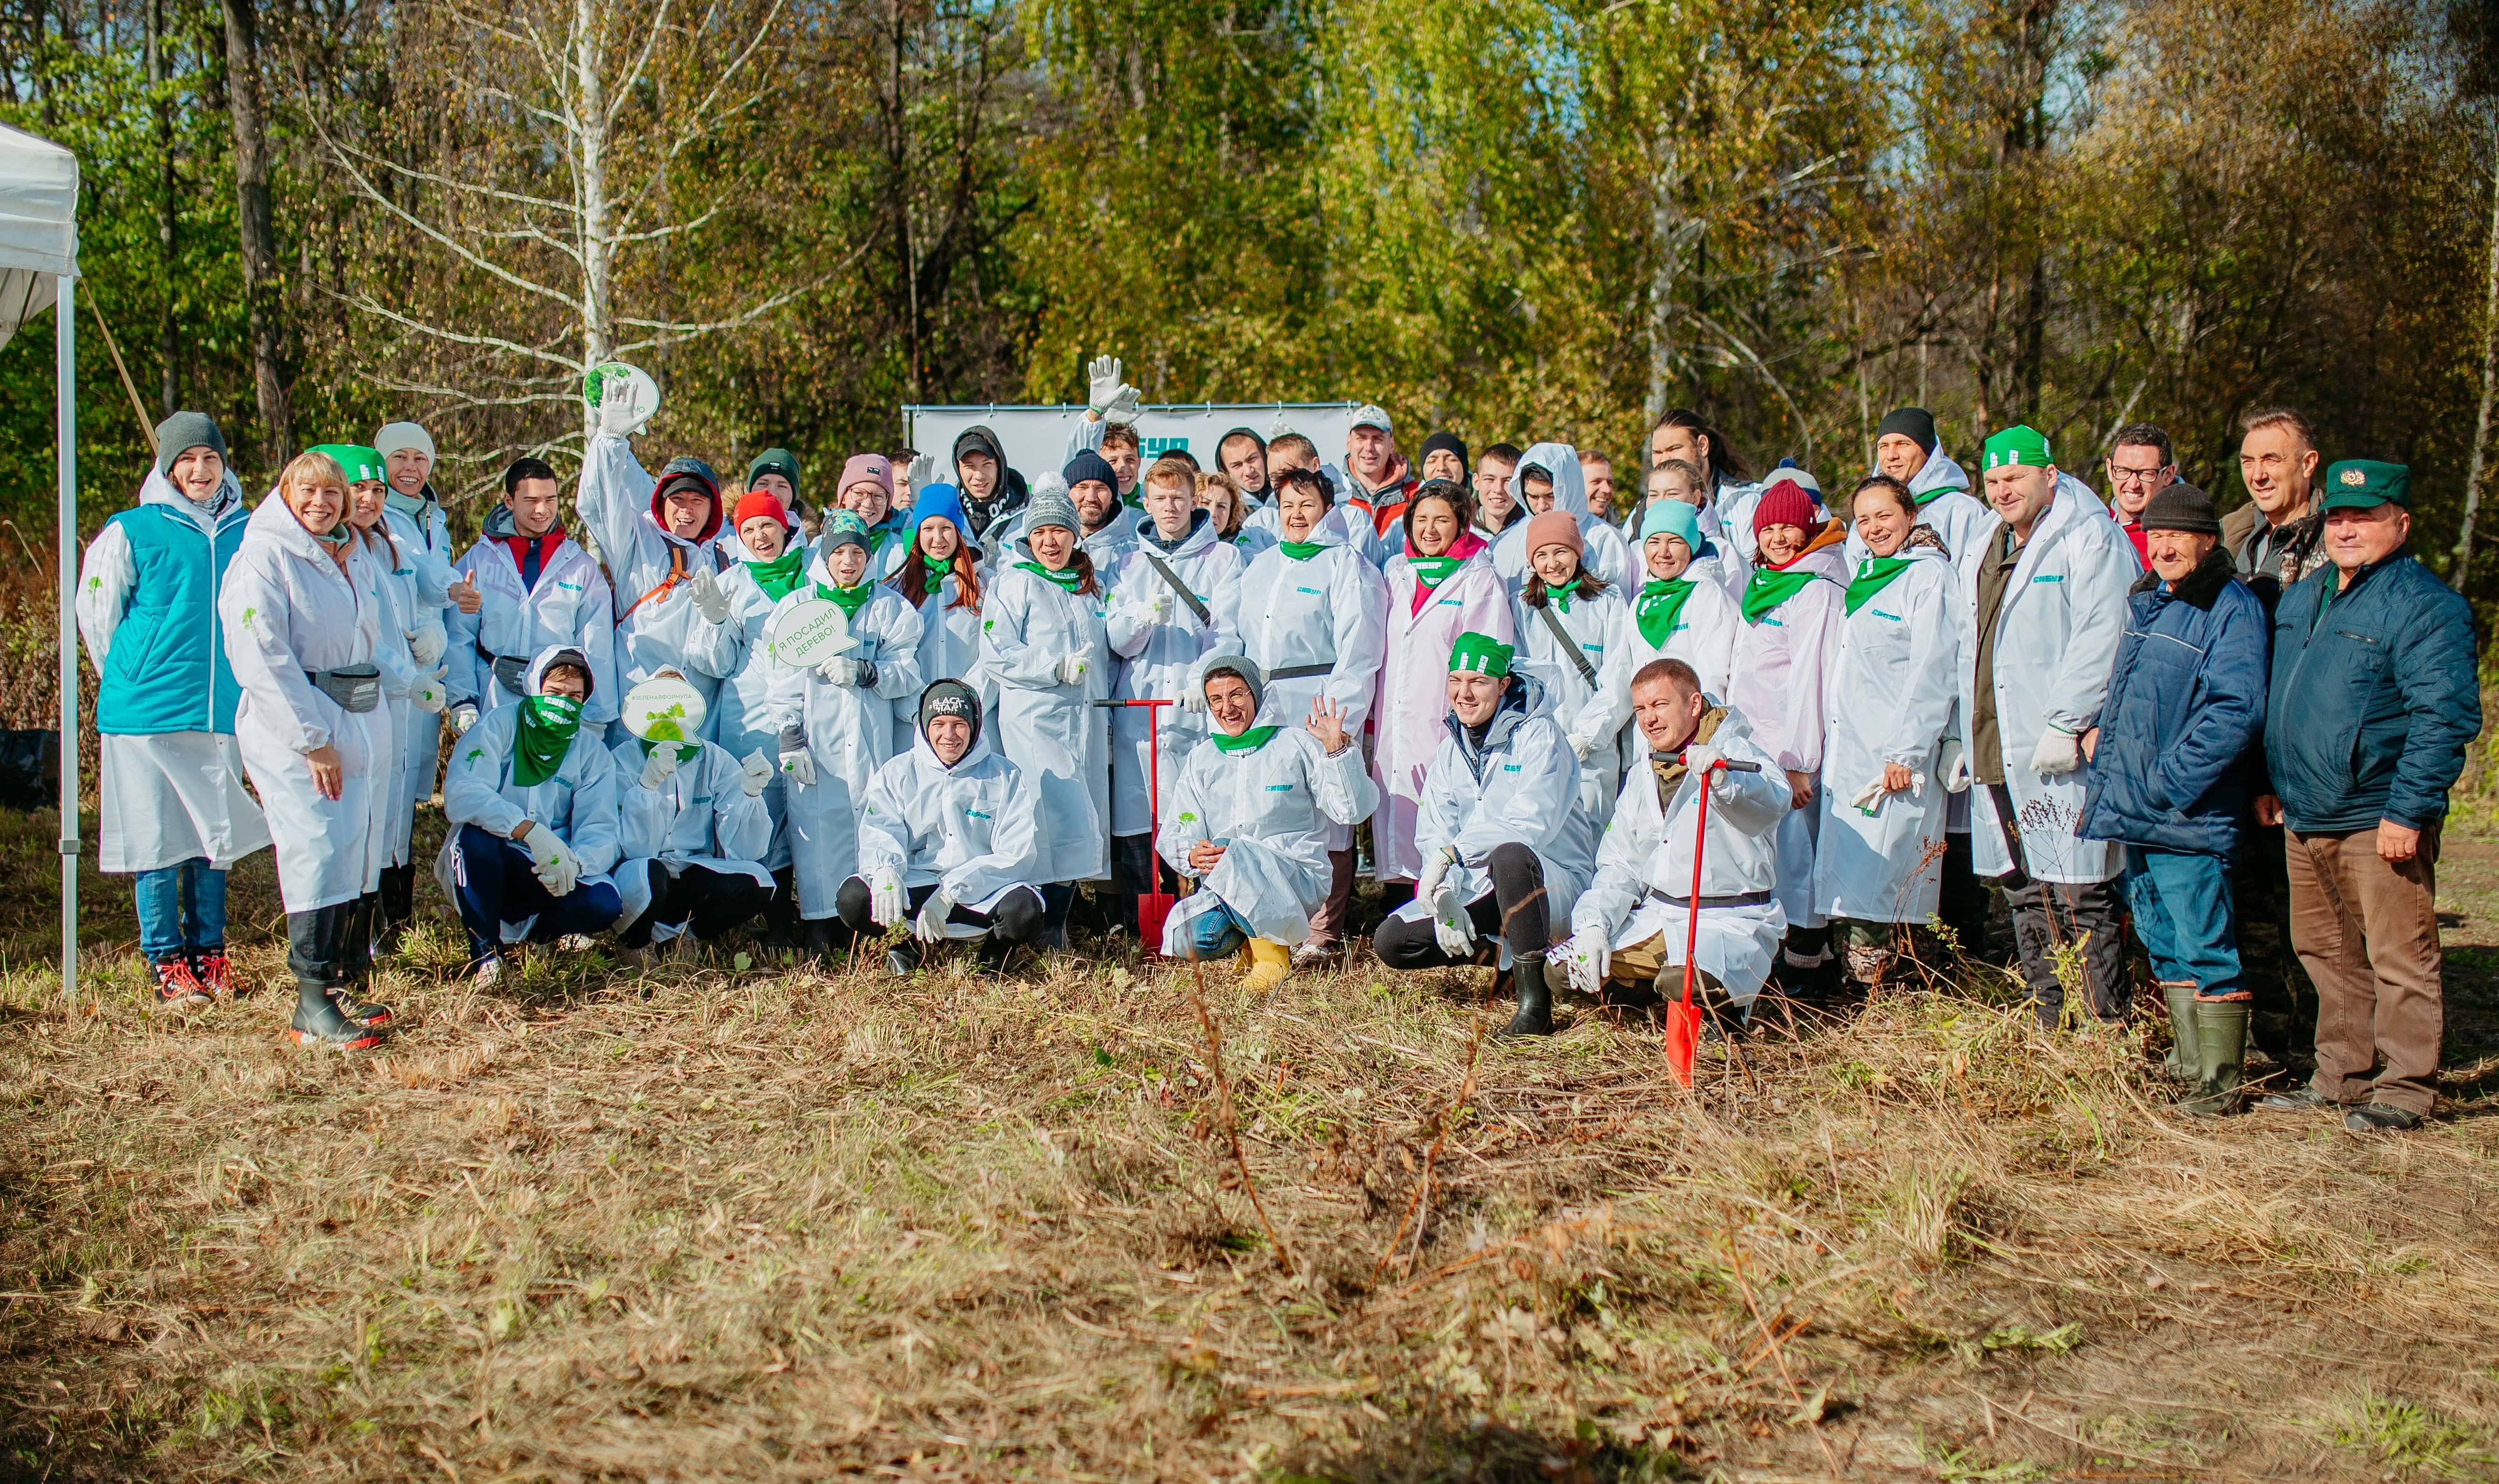 A seasonal fall cycle of tree planting implemented as part of SIBUR's Green Formula program kicked off in Blagoveshchensk